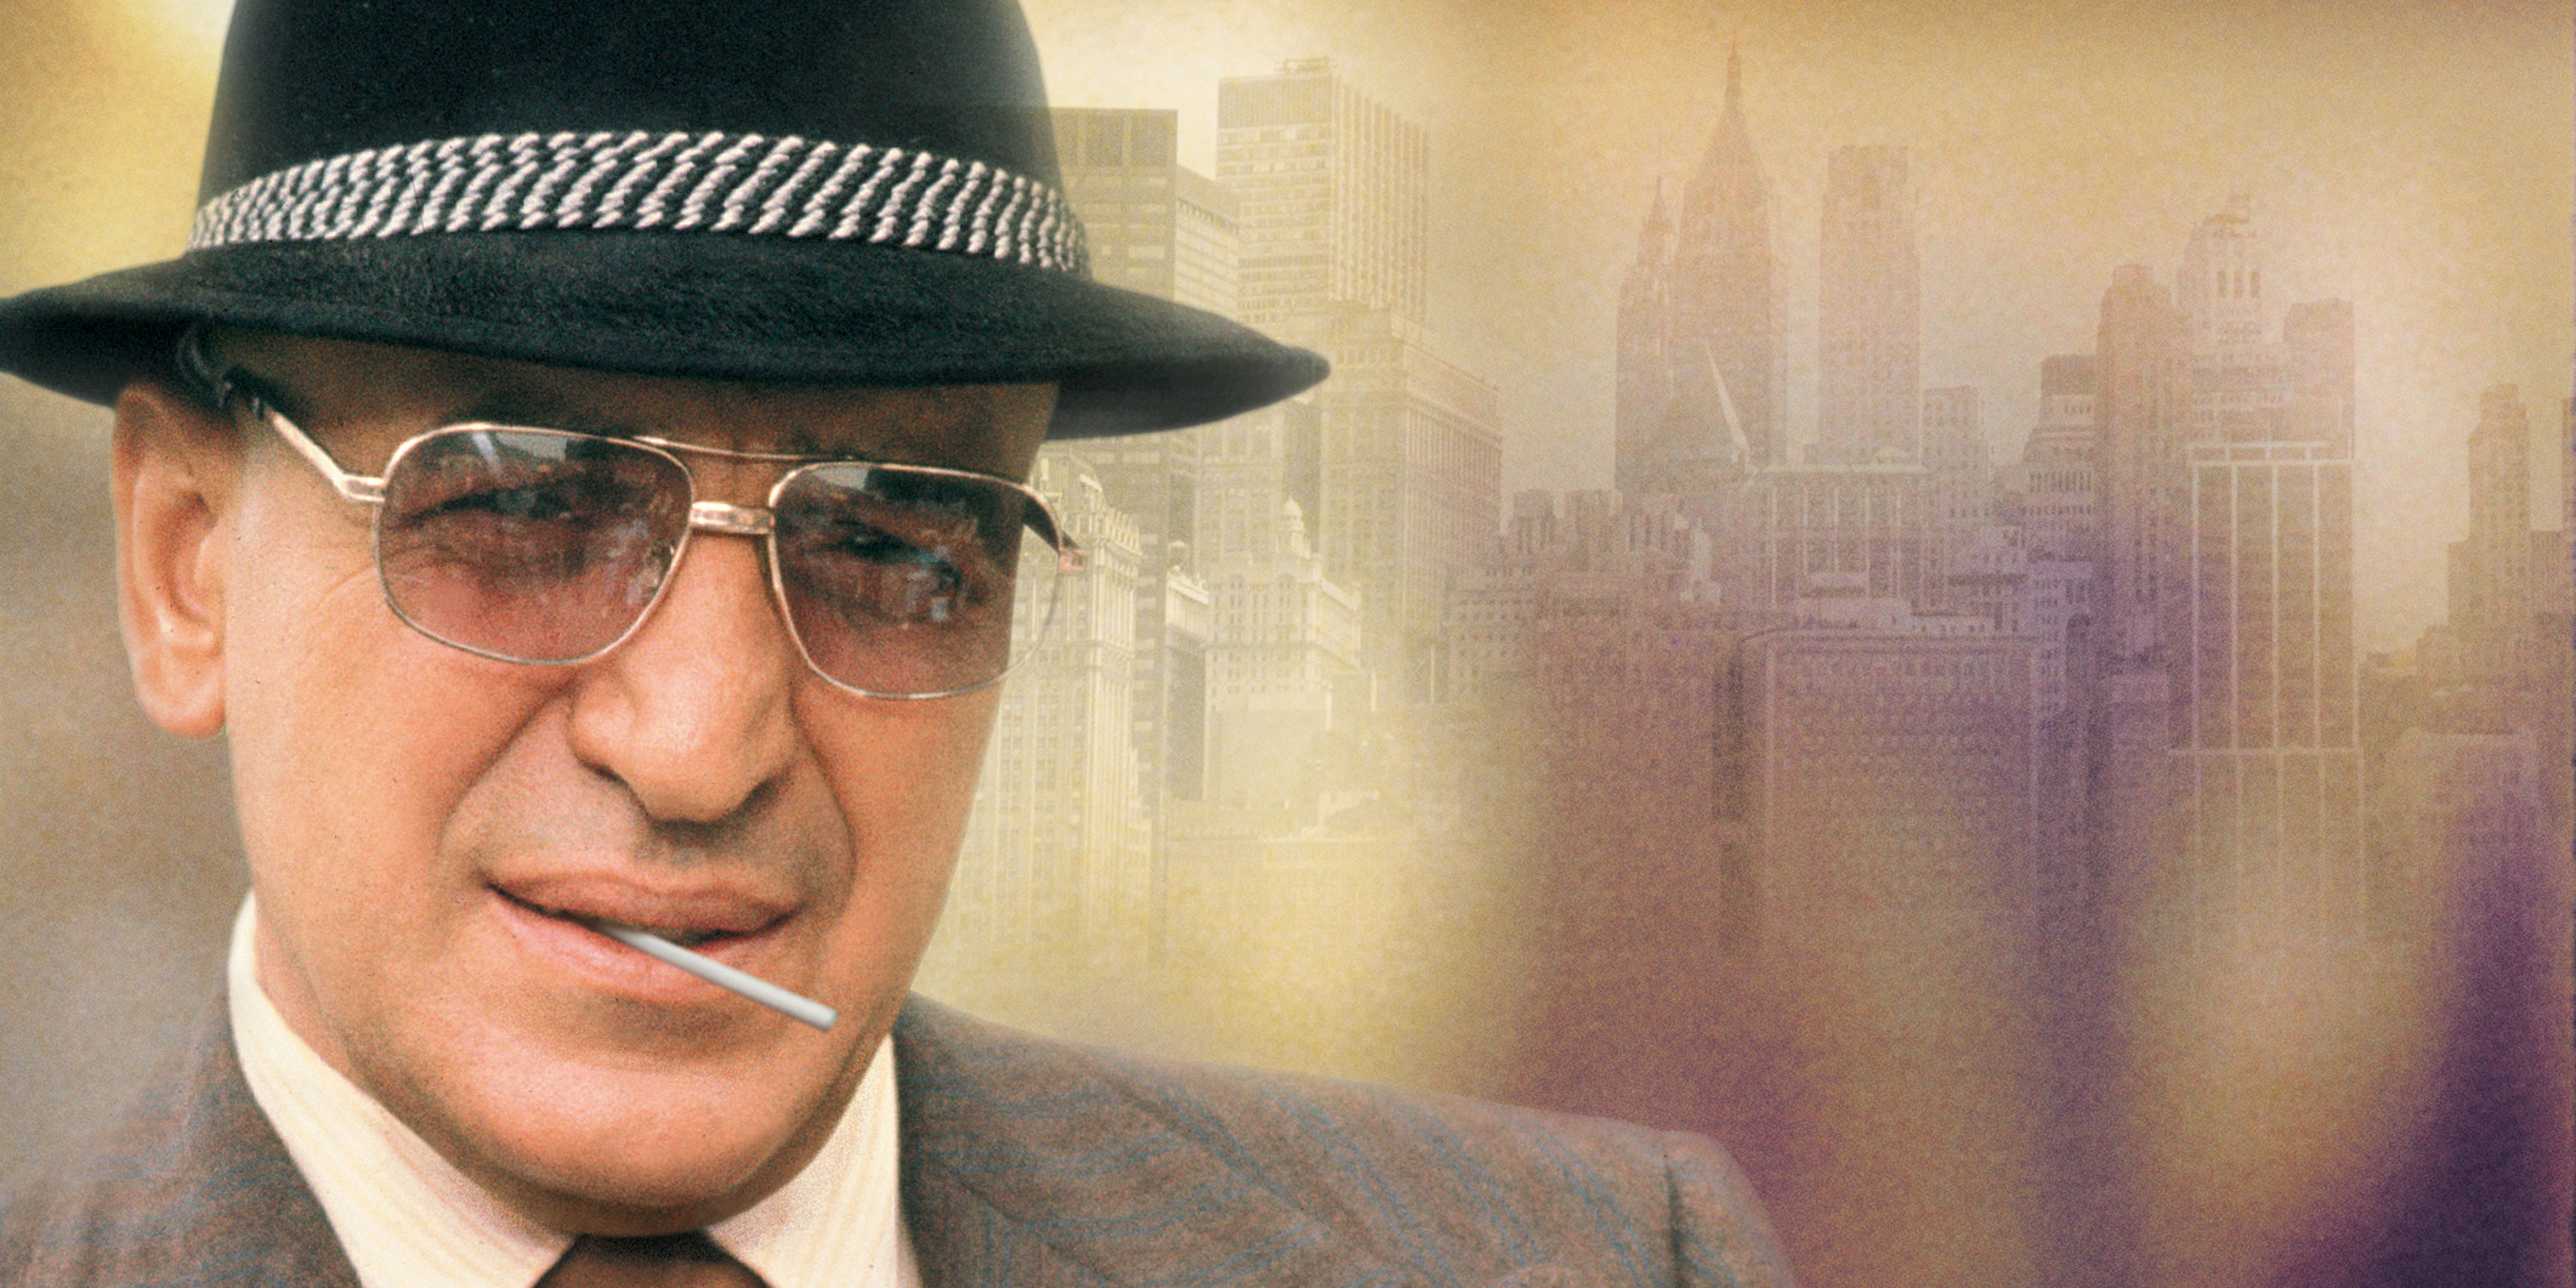 Pictures Of Telly Savalas Celebrities